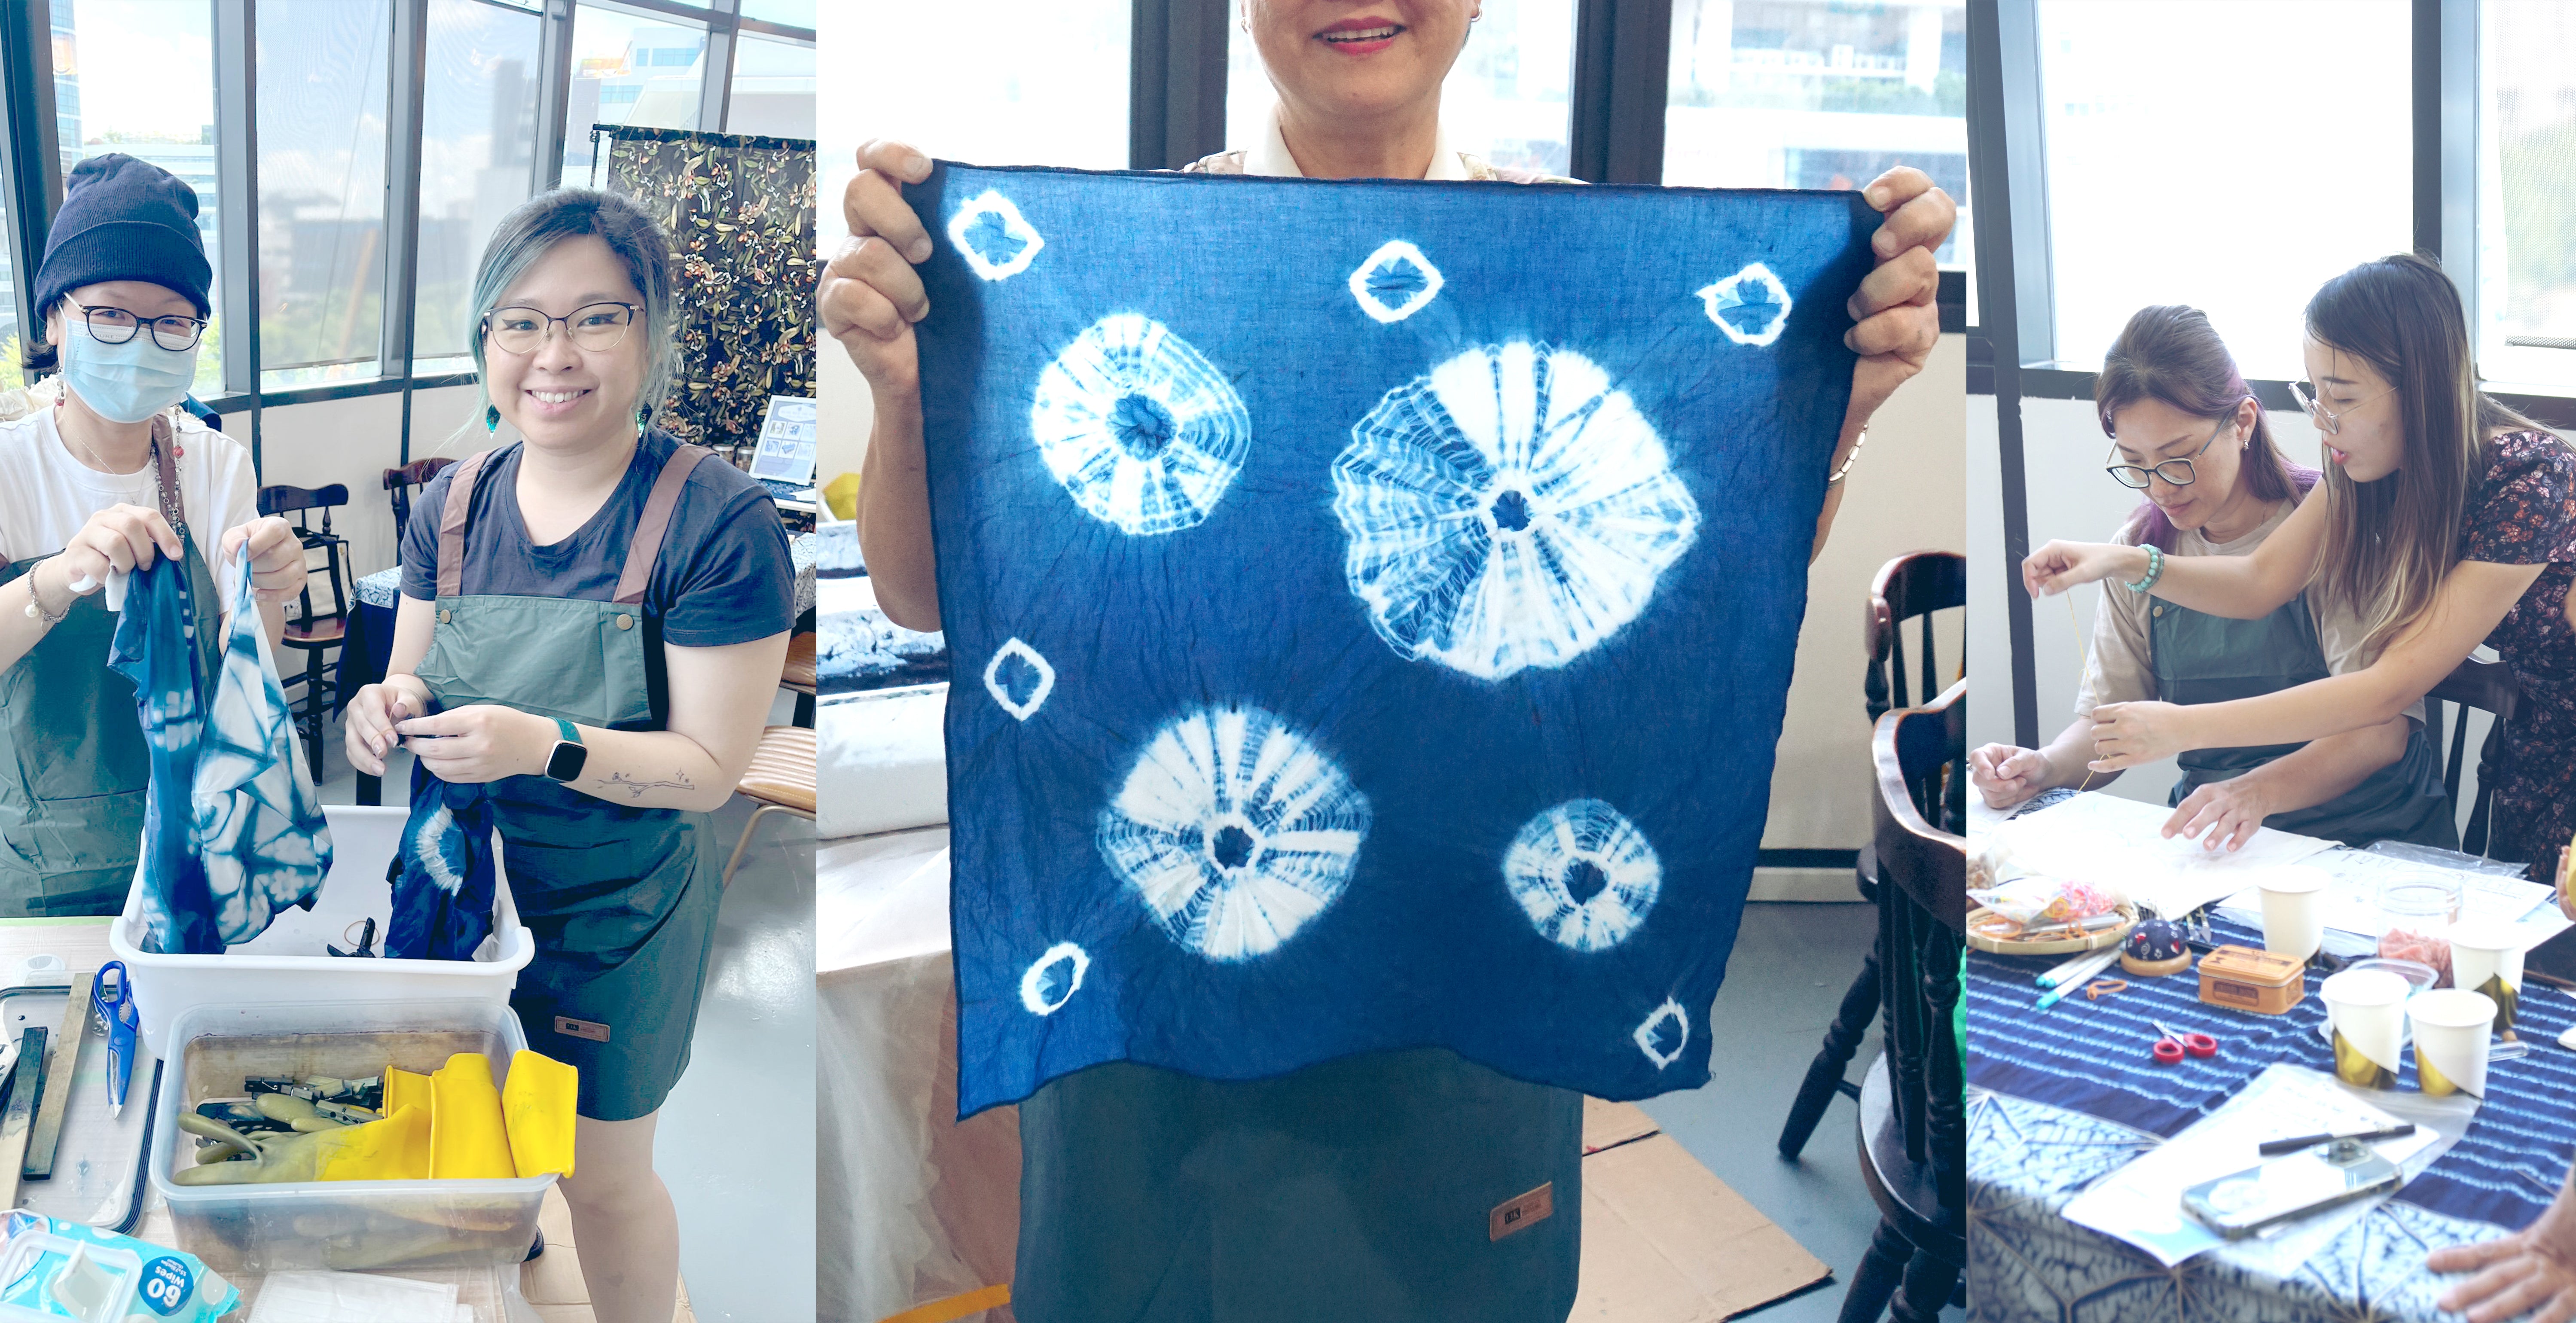 Tie Dyeing with Indigo - The Fabric Workshop and Museum